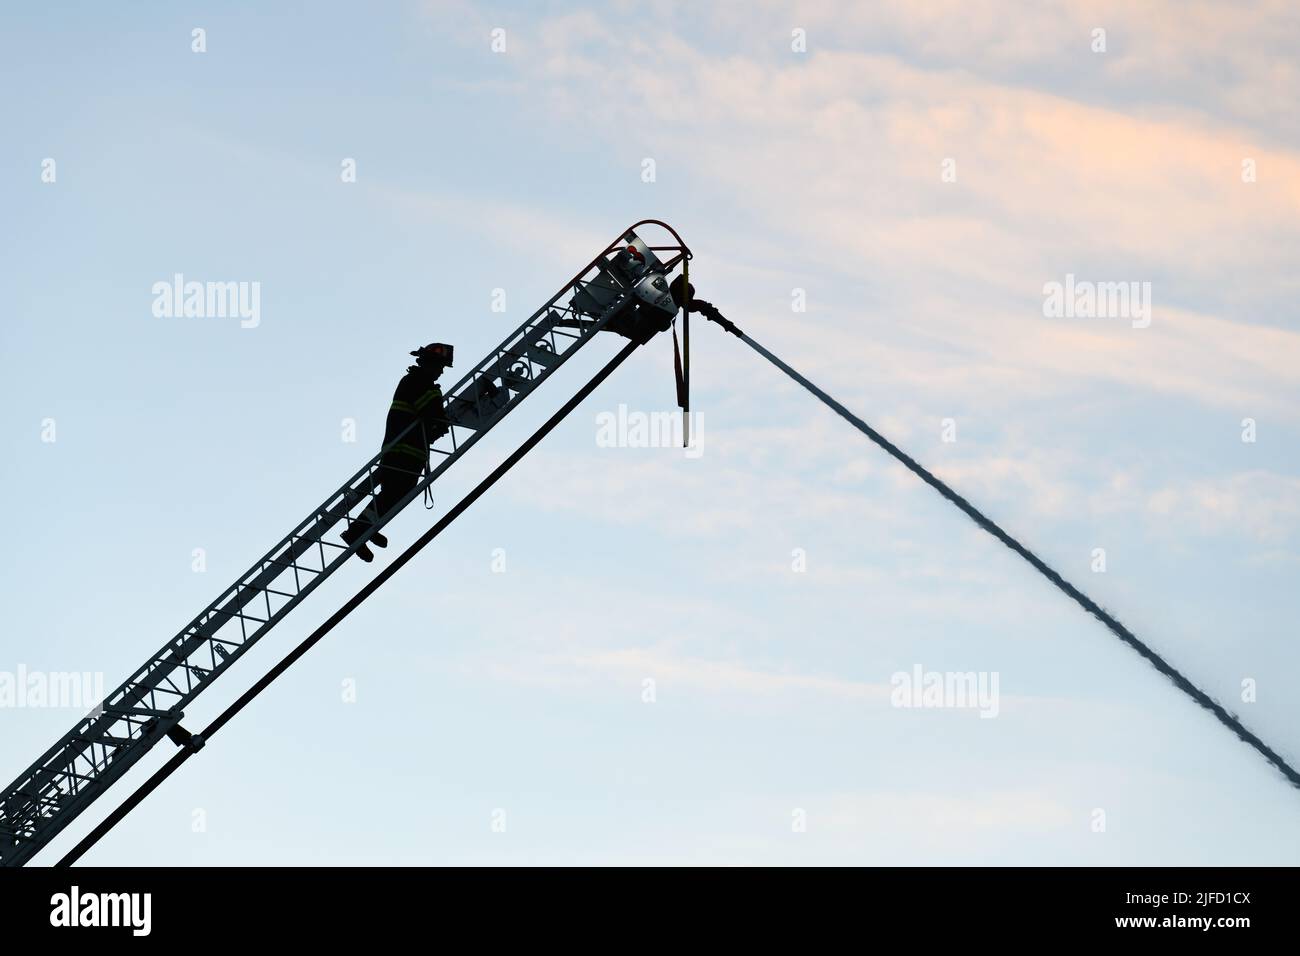 Seattle - June 30, 2022; Fire fighter on a ladder truck spraying stream of water in silhouette against a smokey moring sky Stock Photo